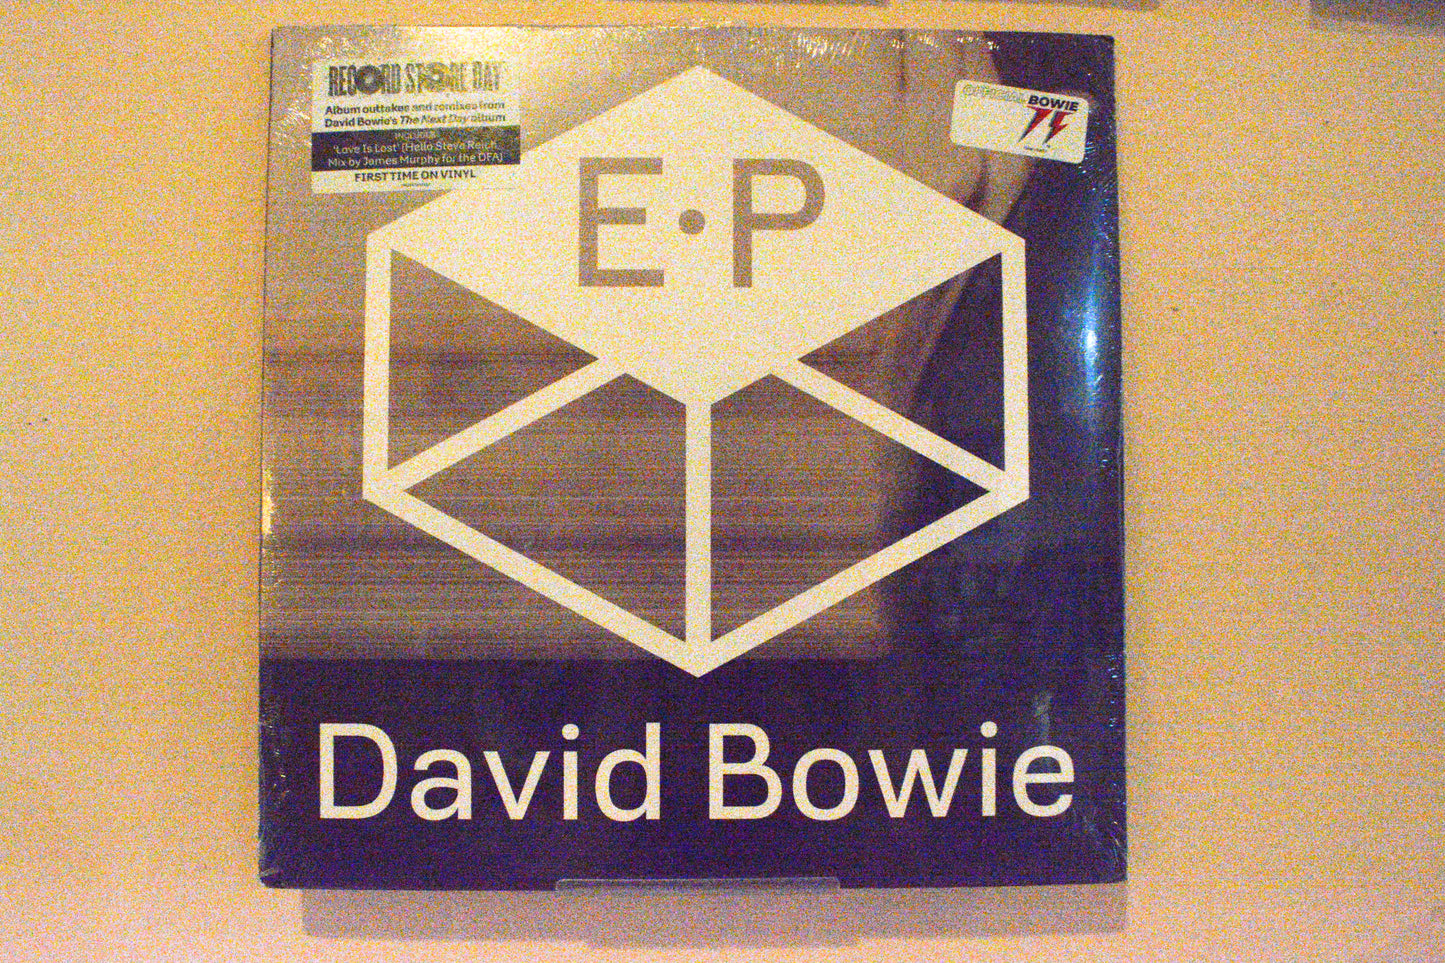 David Bowie - EP (RSD Release)